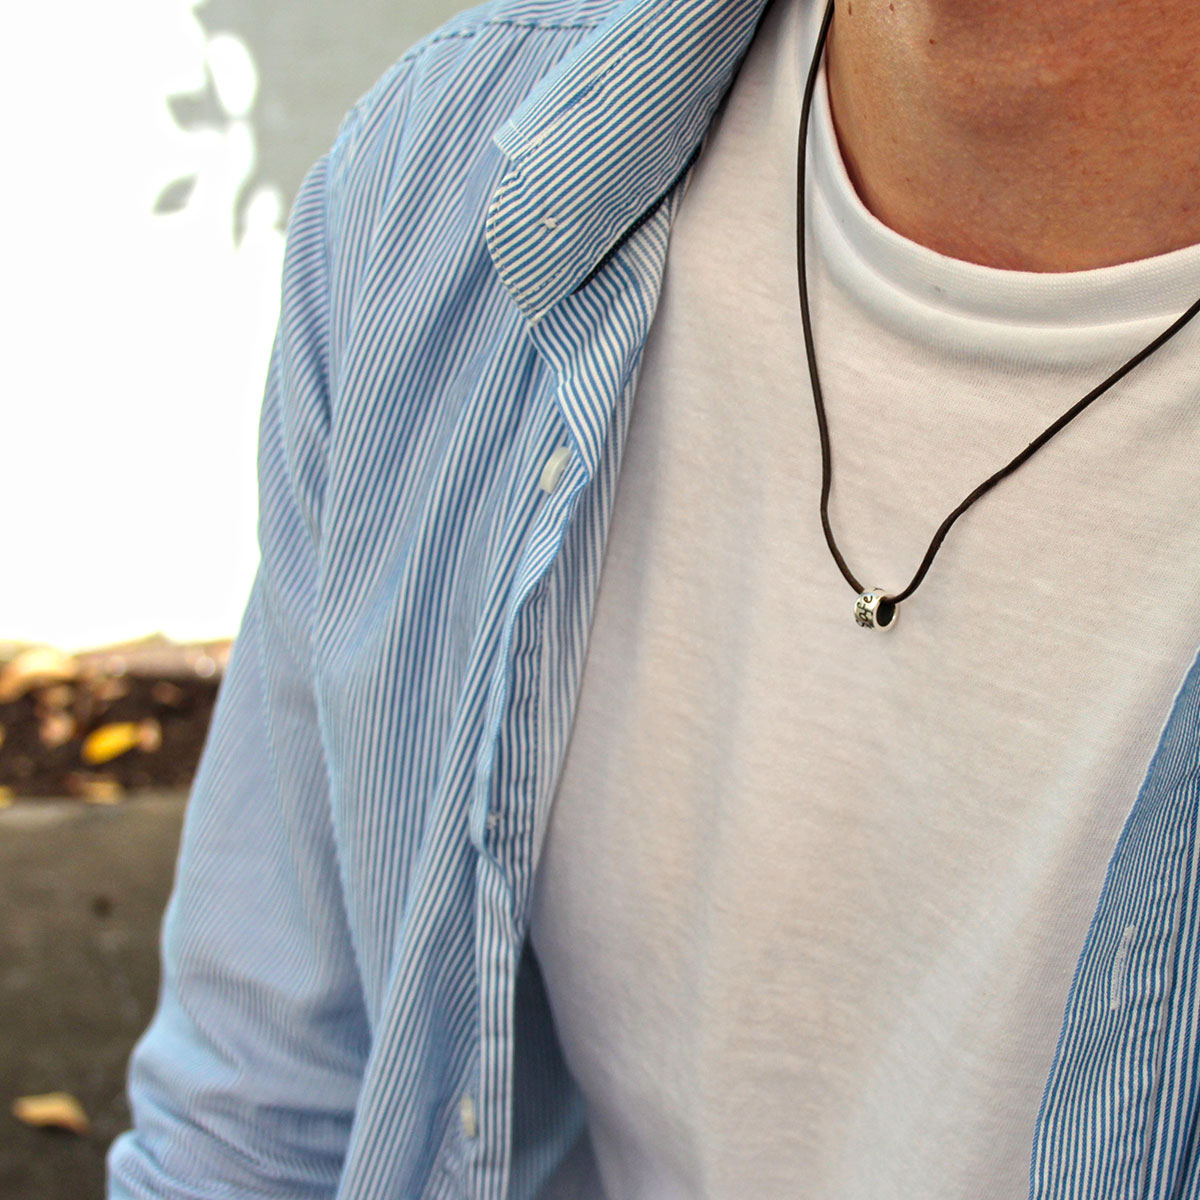 Travel Safe Silver & Leather Necklace for men & women - gift for someone going travelling